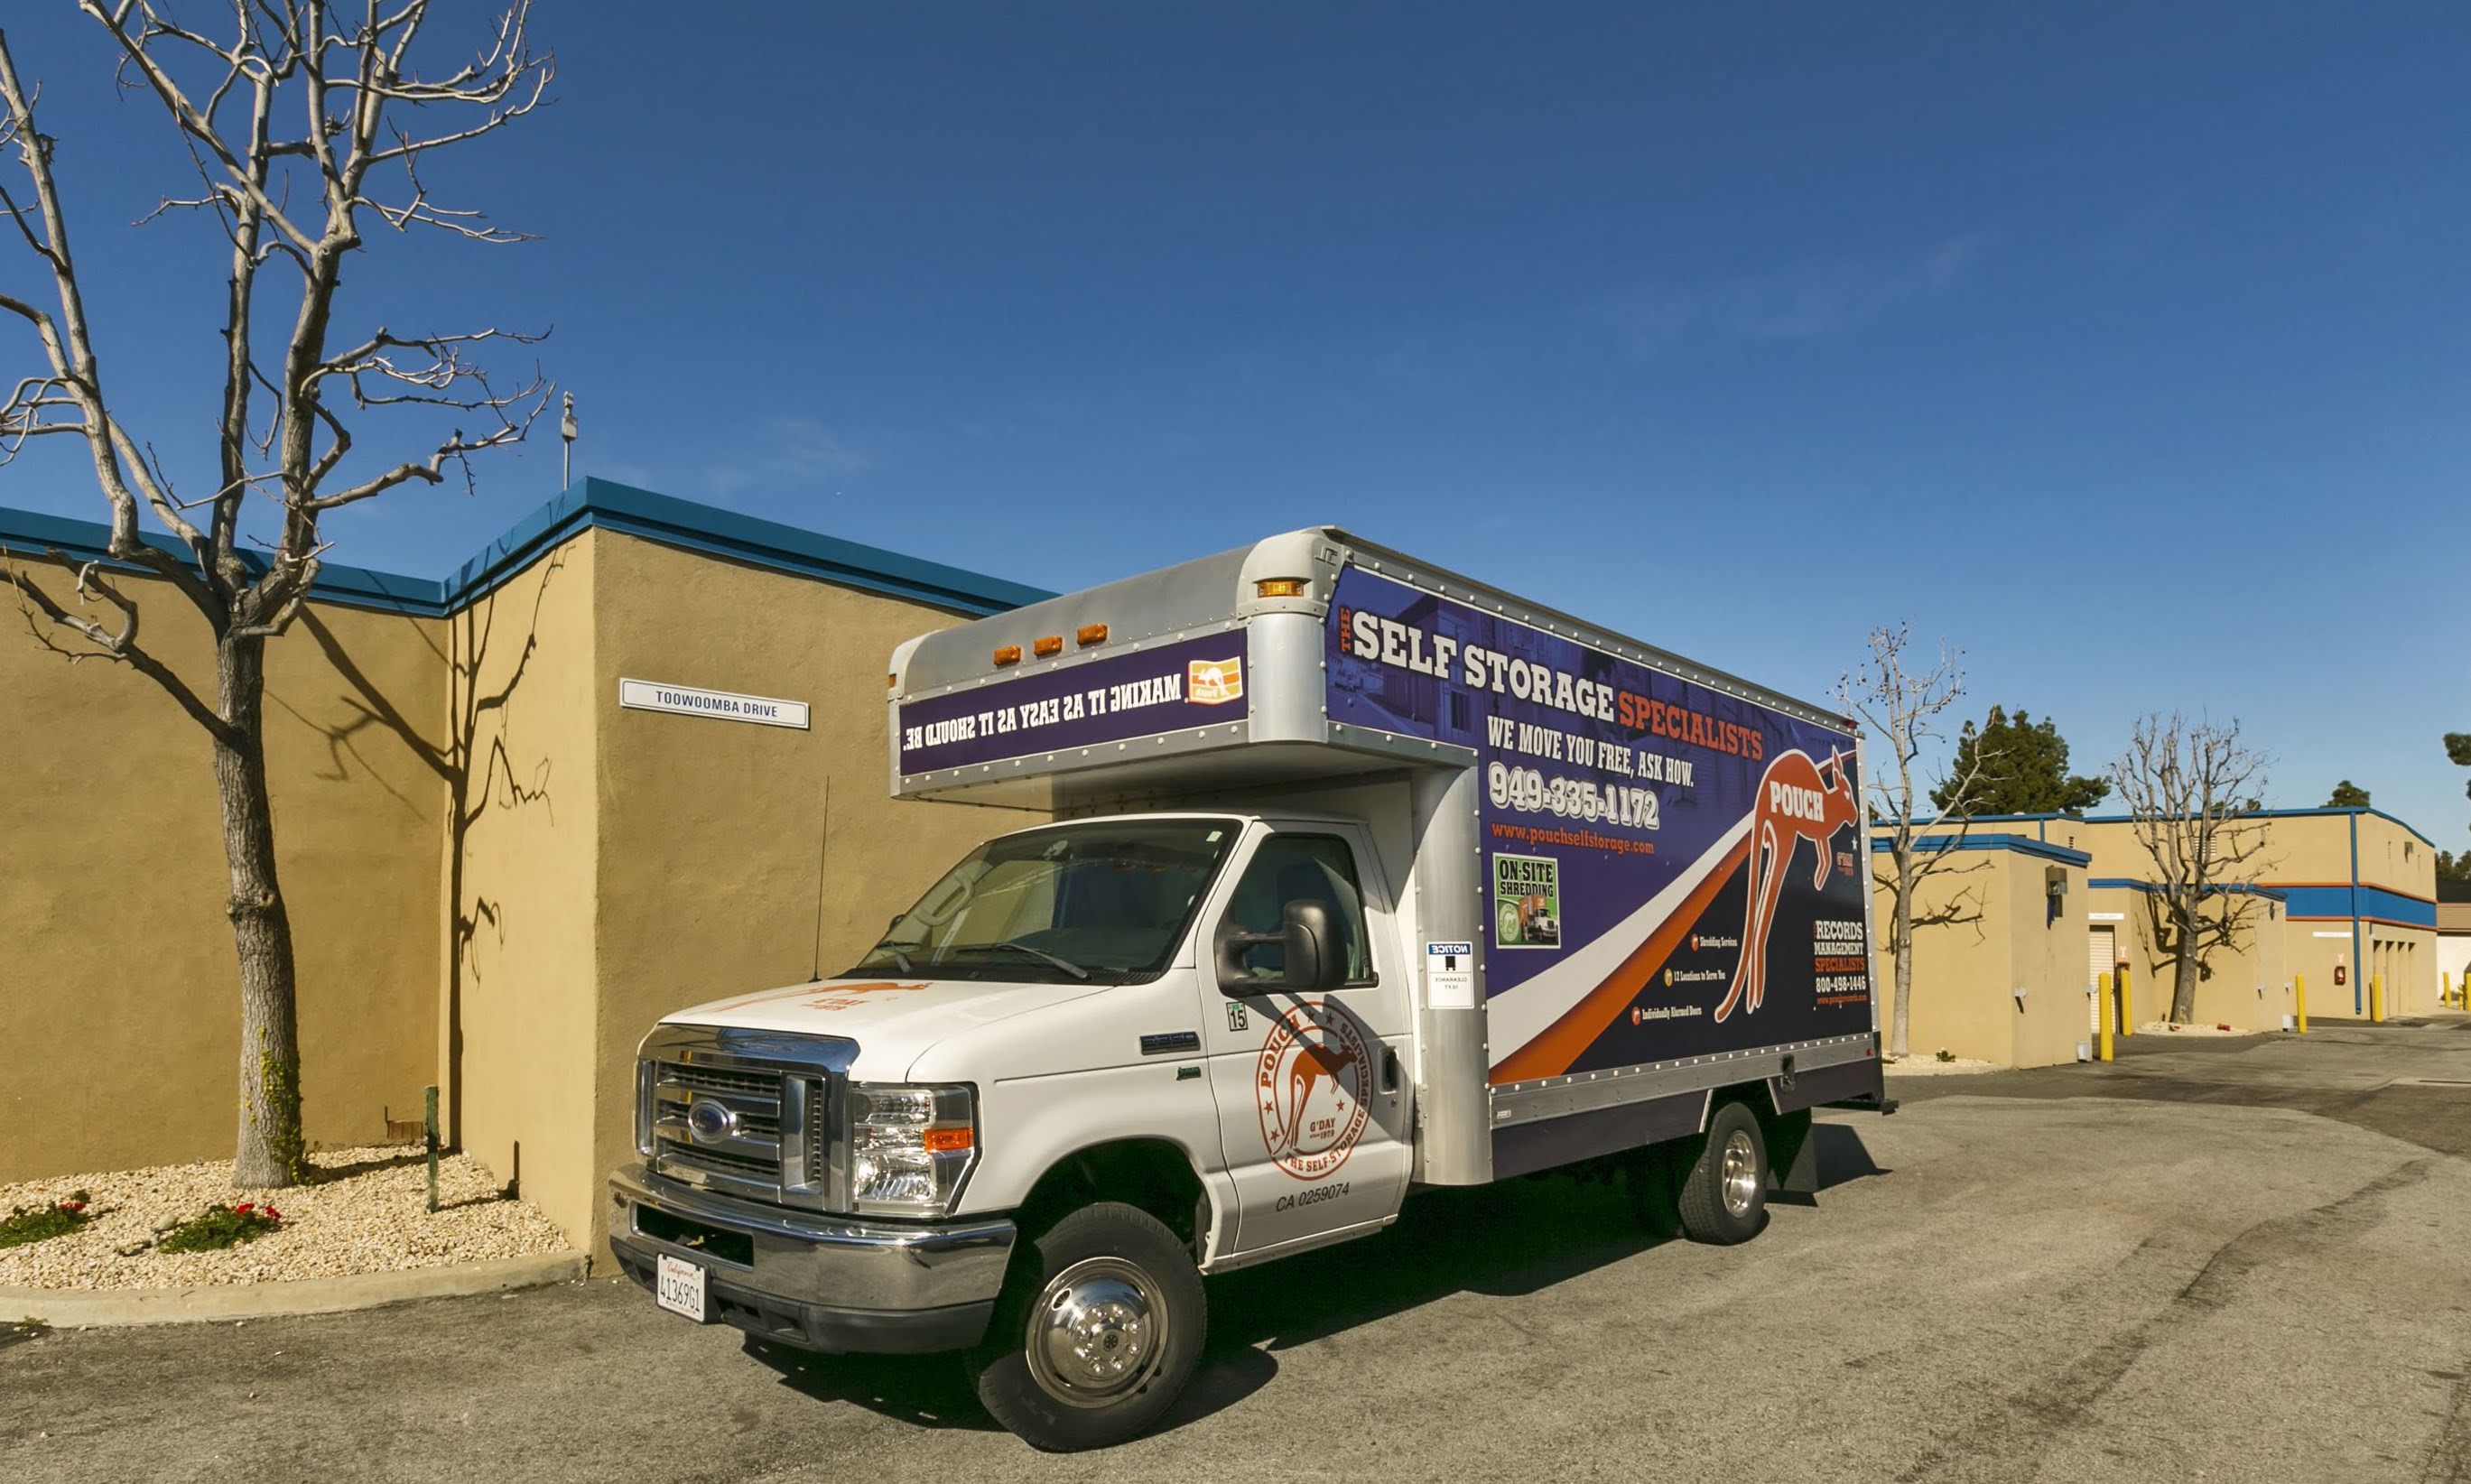 Pouch Self Storage moving truck